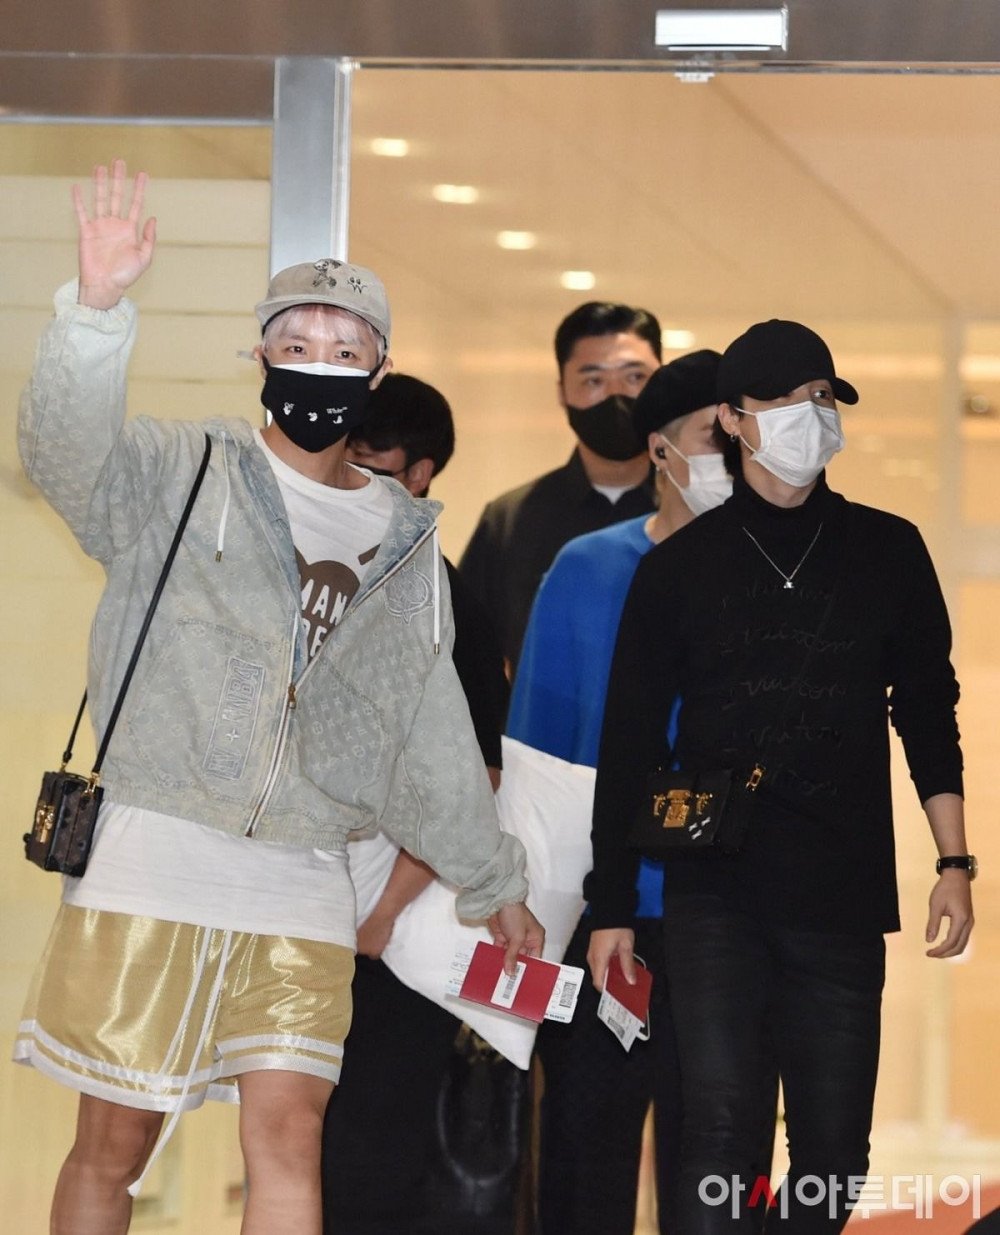 BTS's first airport pictures on the way to attend the 'SDG Moment 2021' session of the 76th United Nations General Assembly on September 20th